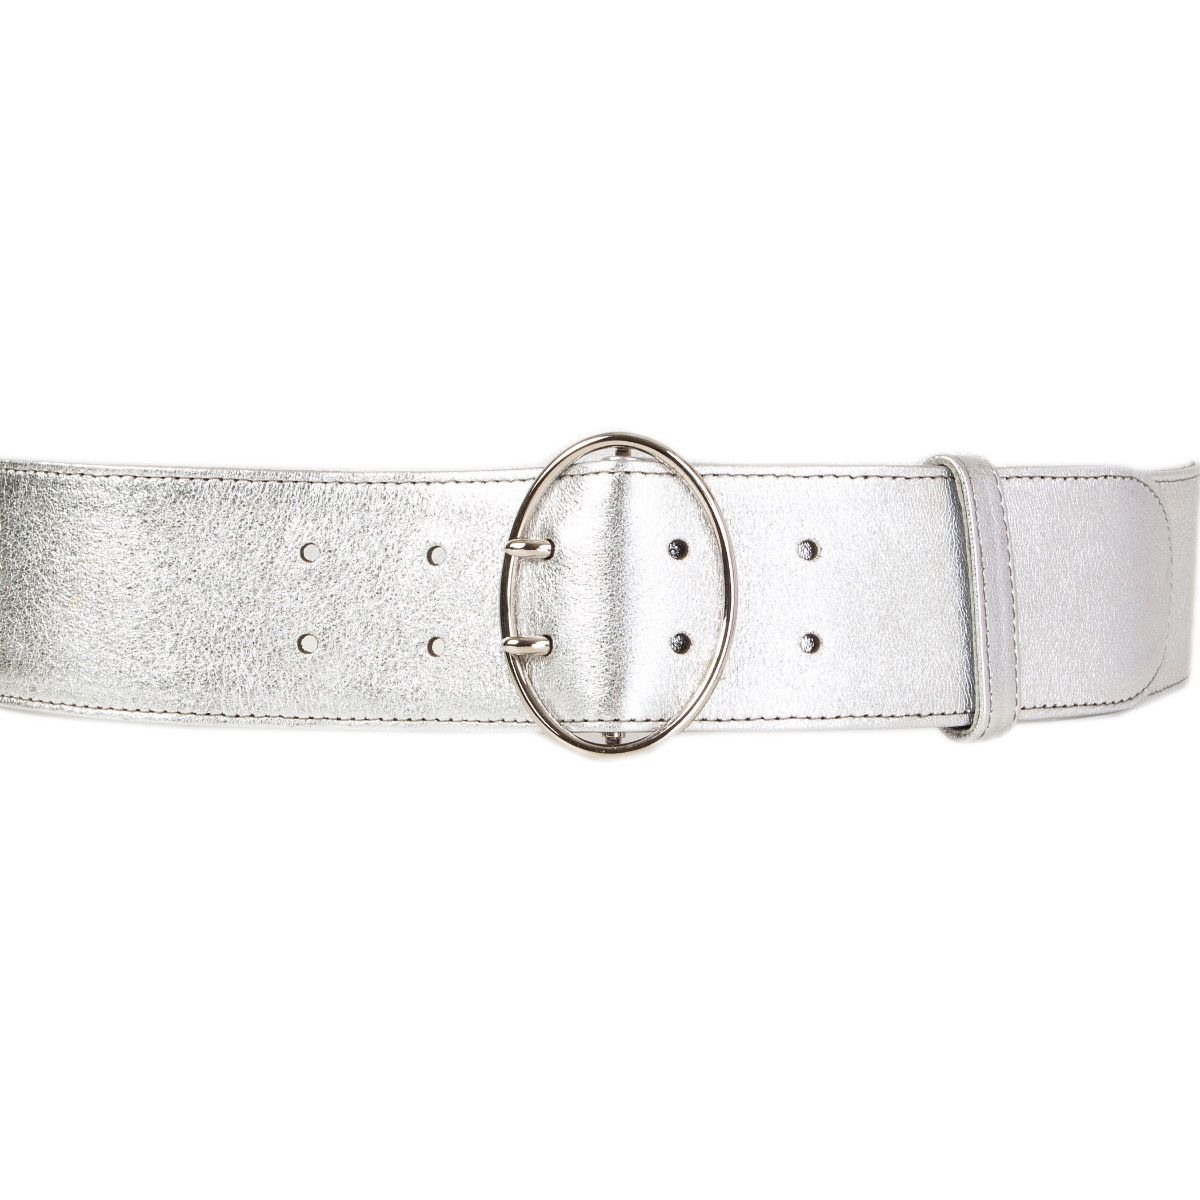 #148A 1.25" WIDE WHITE PATENT LEATHER BELTS W/JEWEL BUCKLE IN SIZES 20" TO 38" 